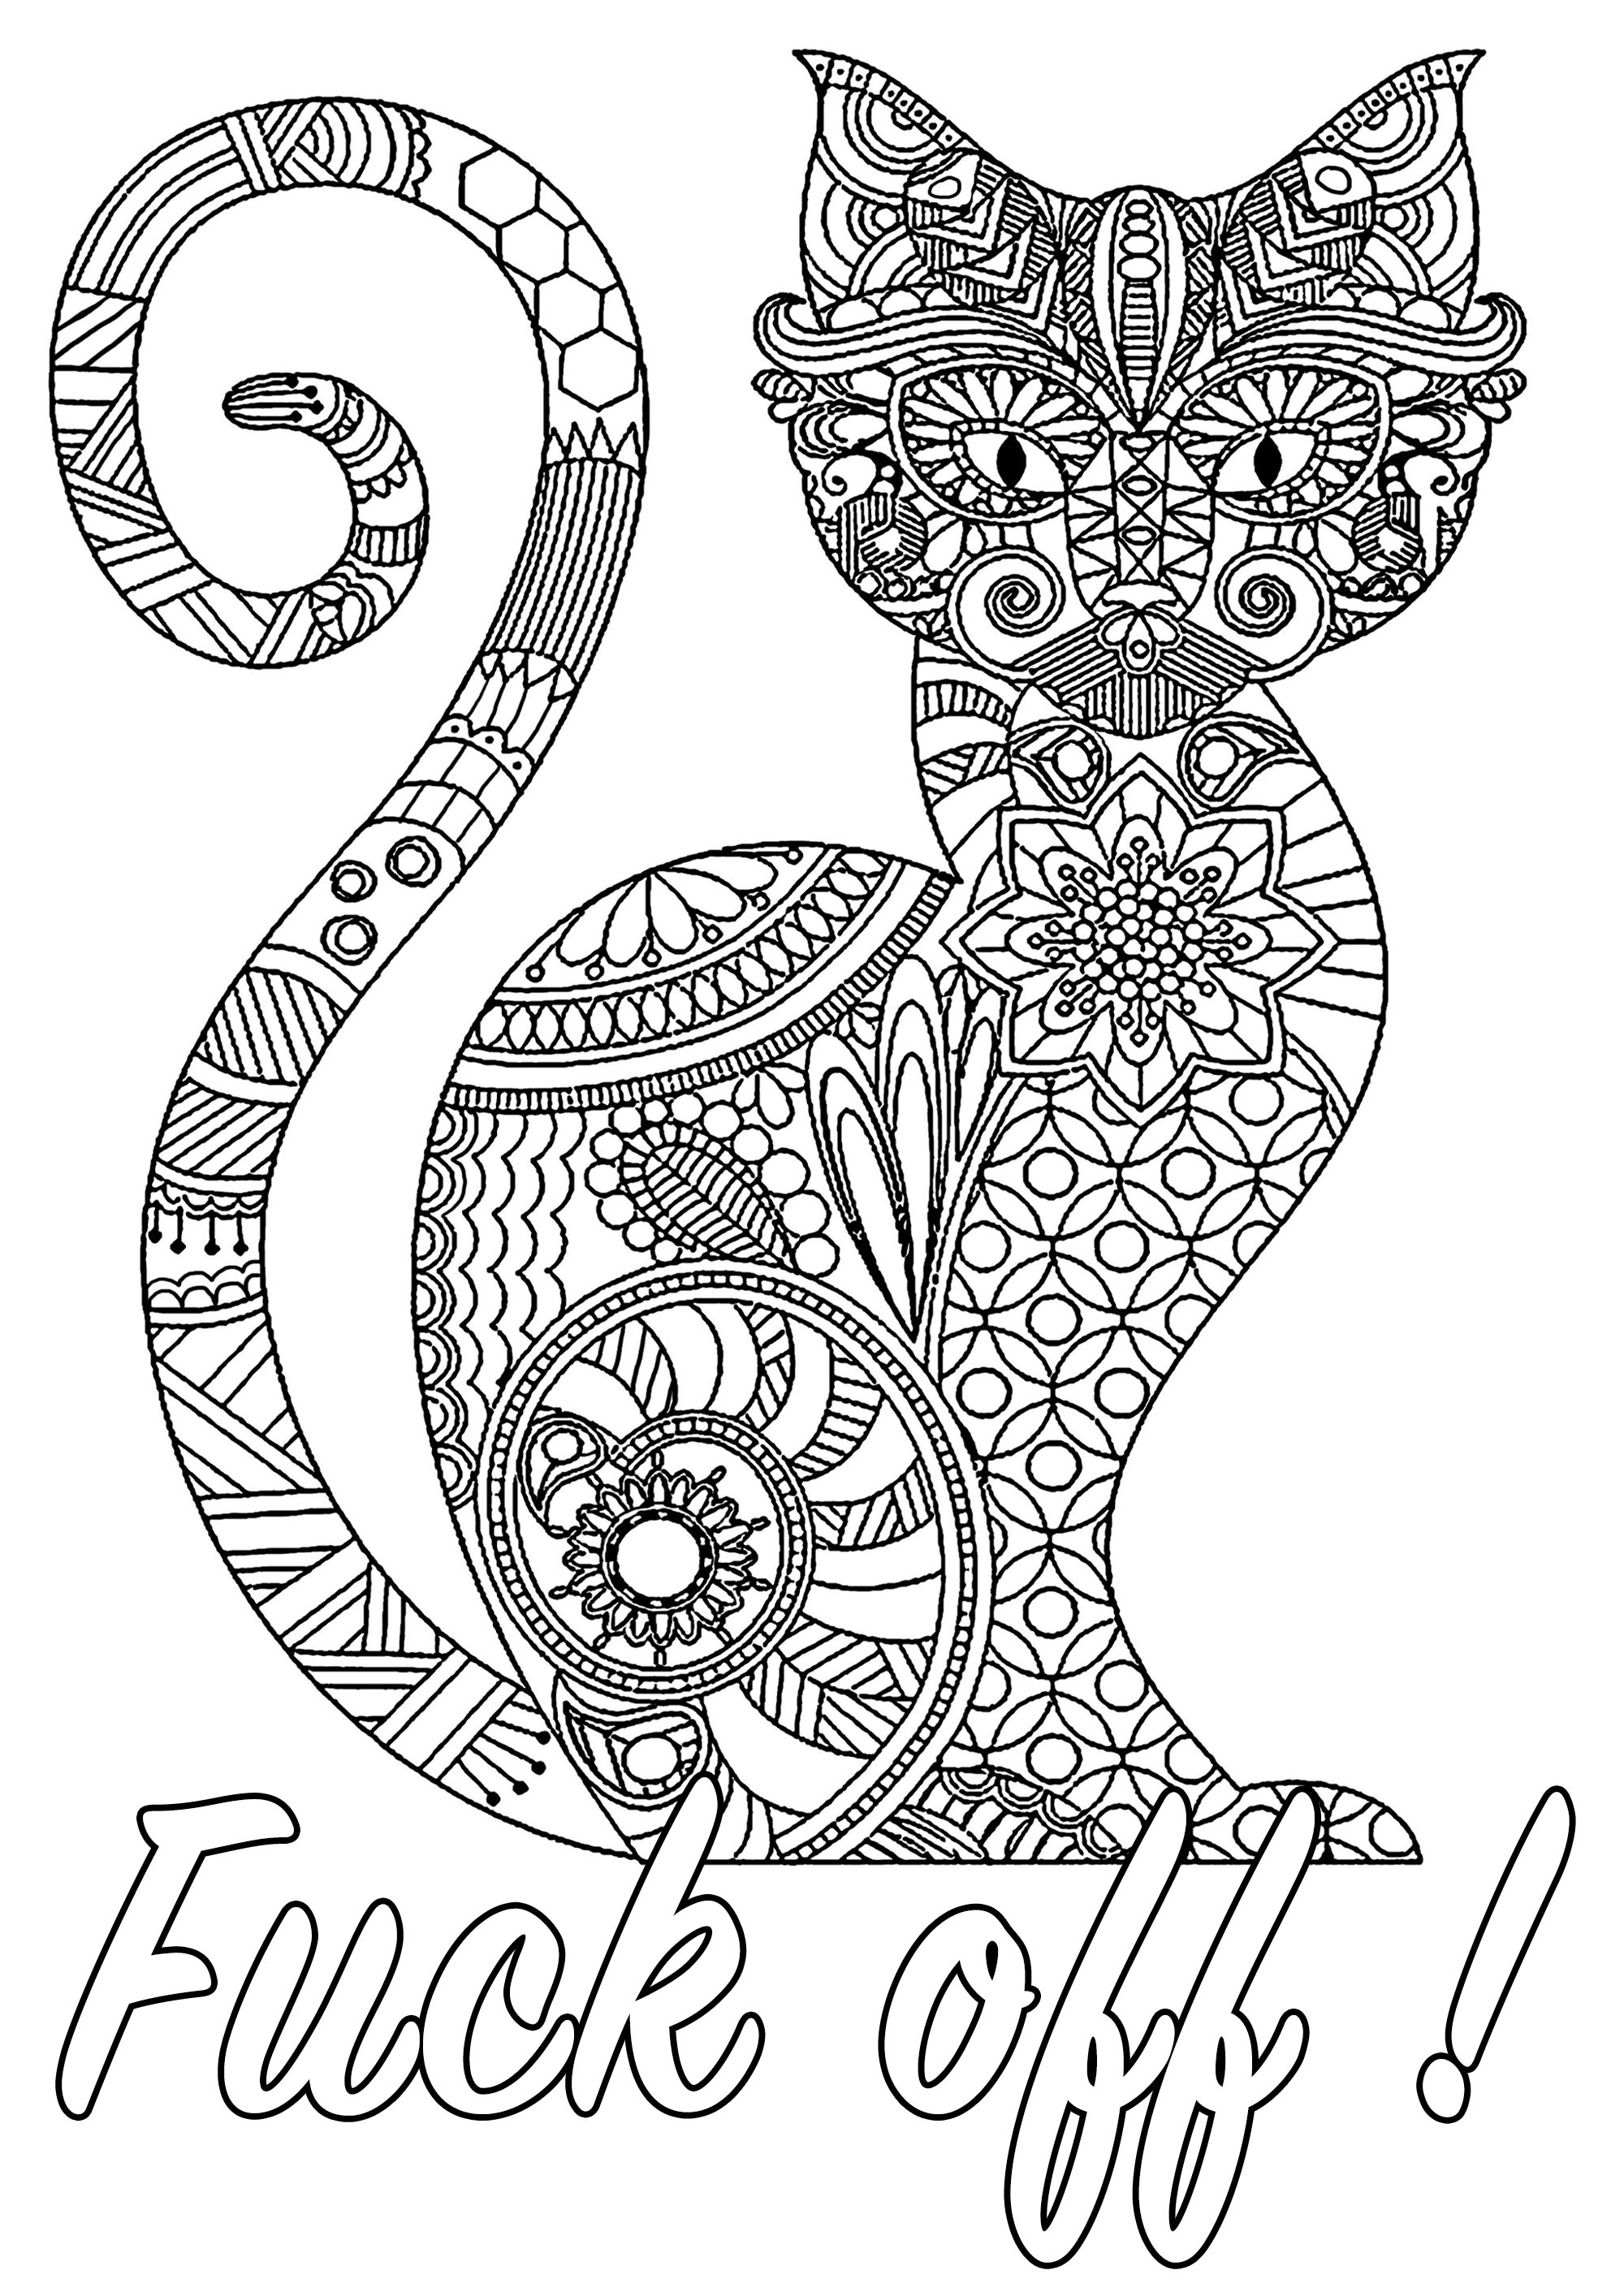 Fuck off ! : Swear word coloring page with cute cat